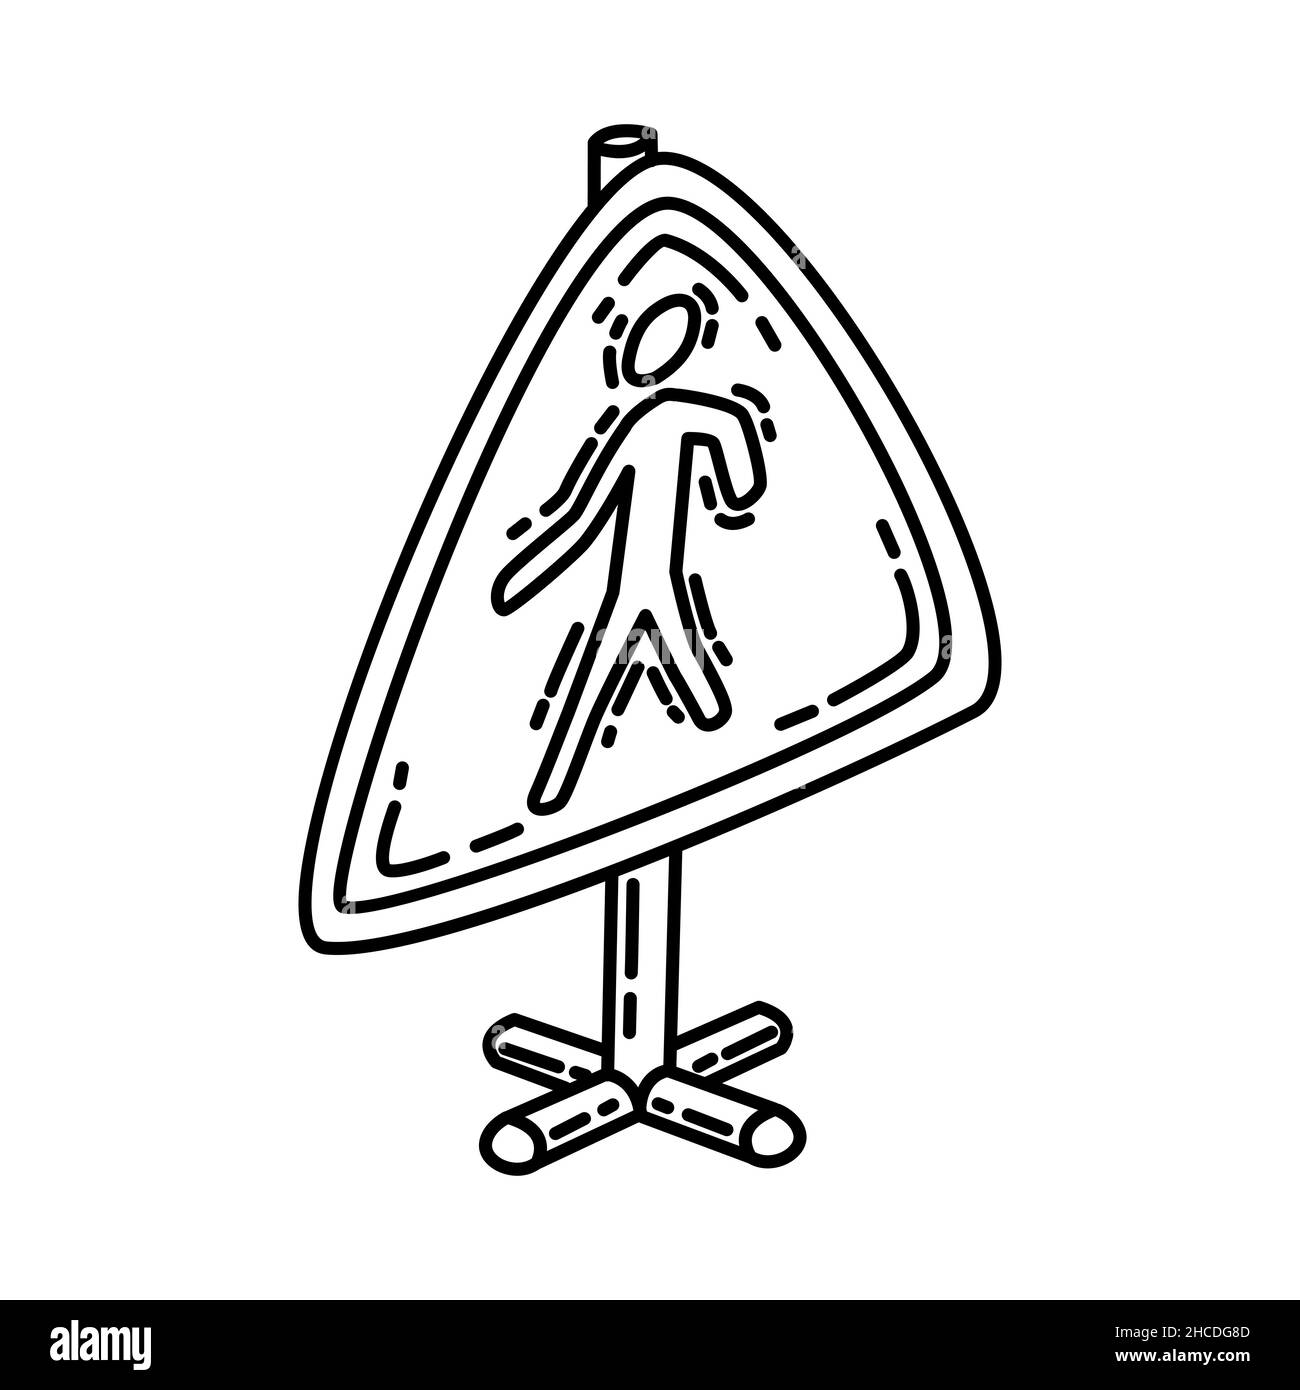 Pedestrians on The Road Part of Warning Road Signs Hand Drawn Icon Set Vector. Stock Vector